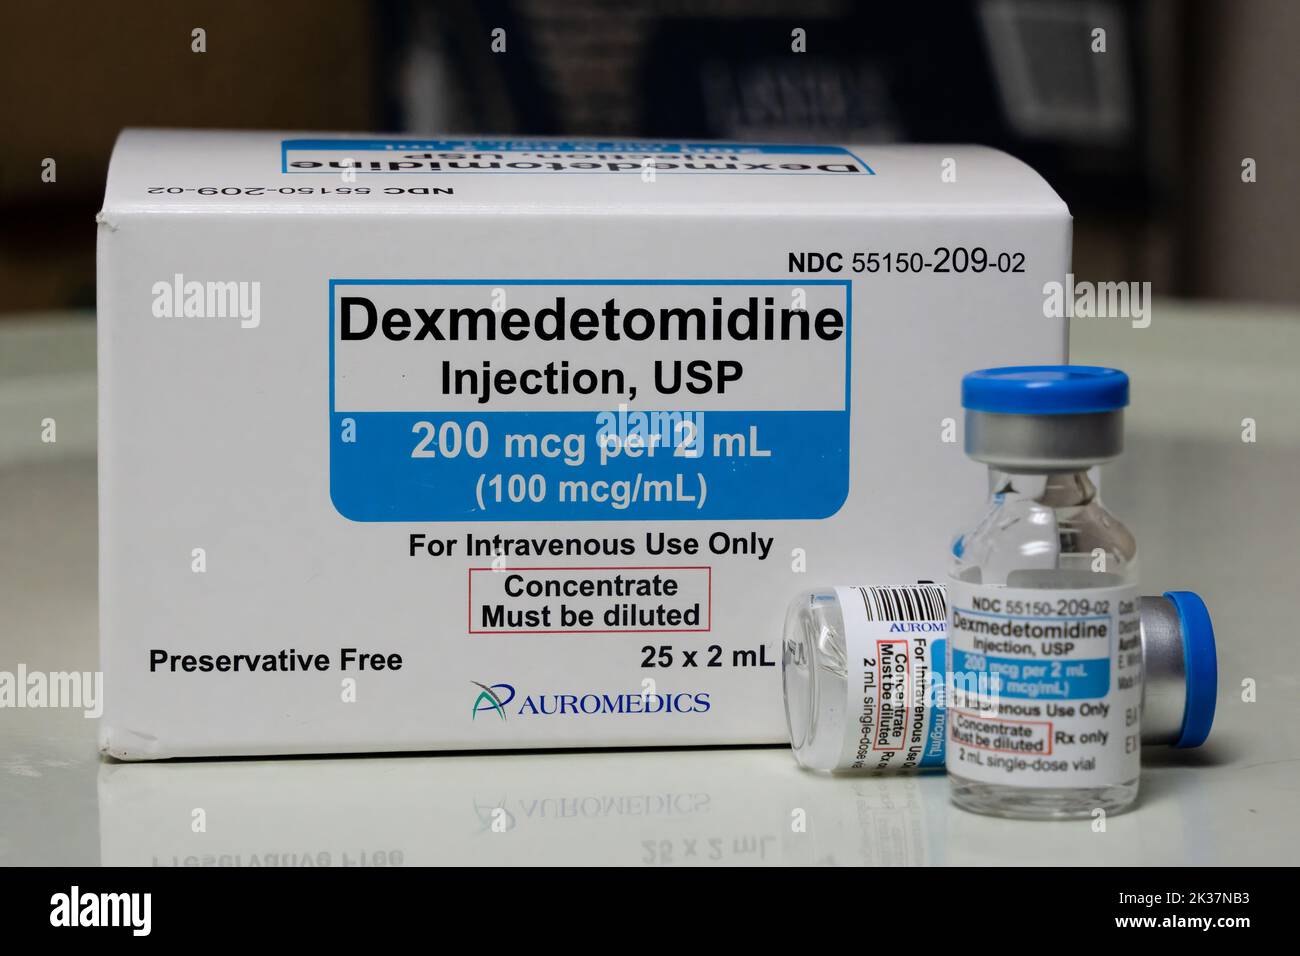 Dexmedetomidine Common brands: Precedex in 0.9 % sodium chlor, Precedex Sedative It can keep you asleep during surgery or other medical procedures. Stock Photo